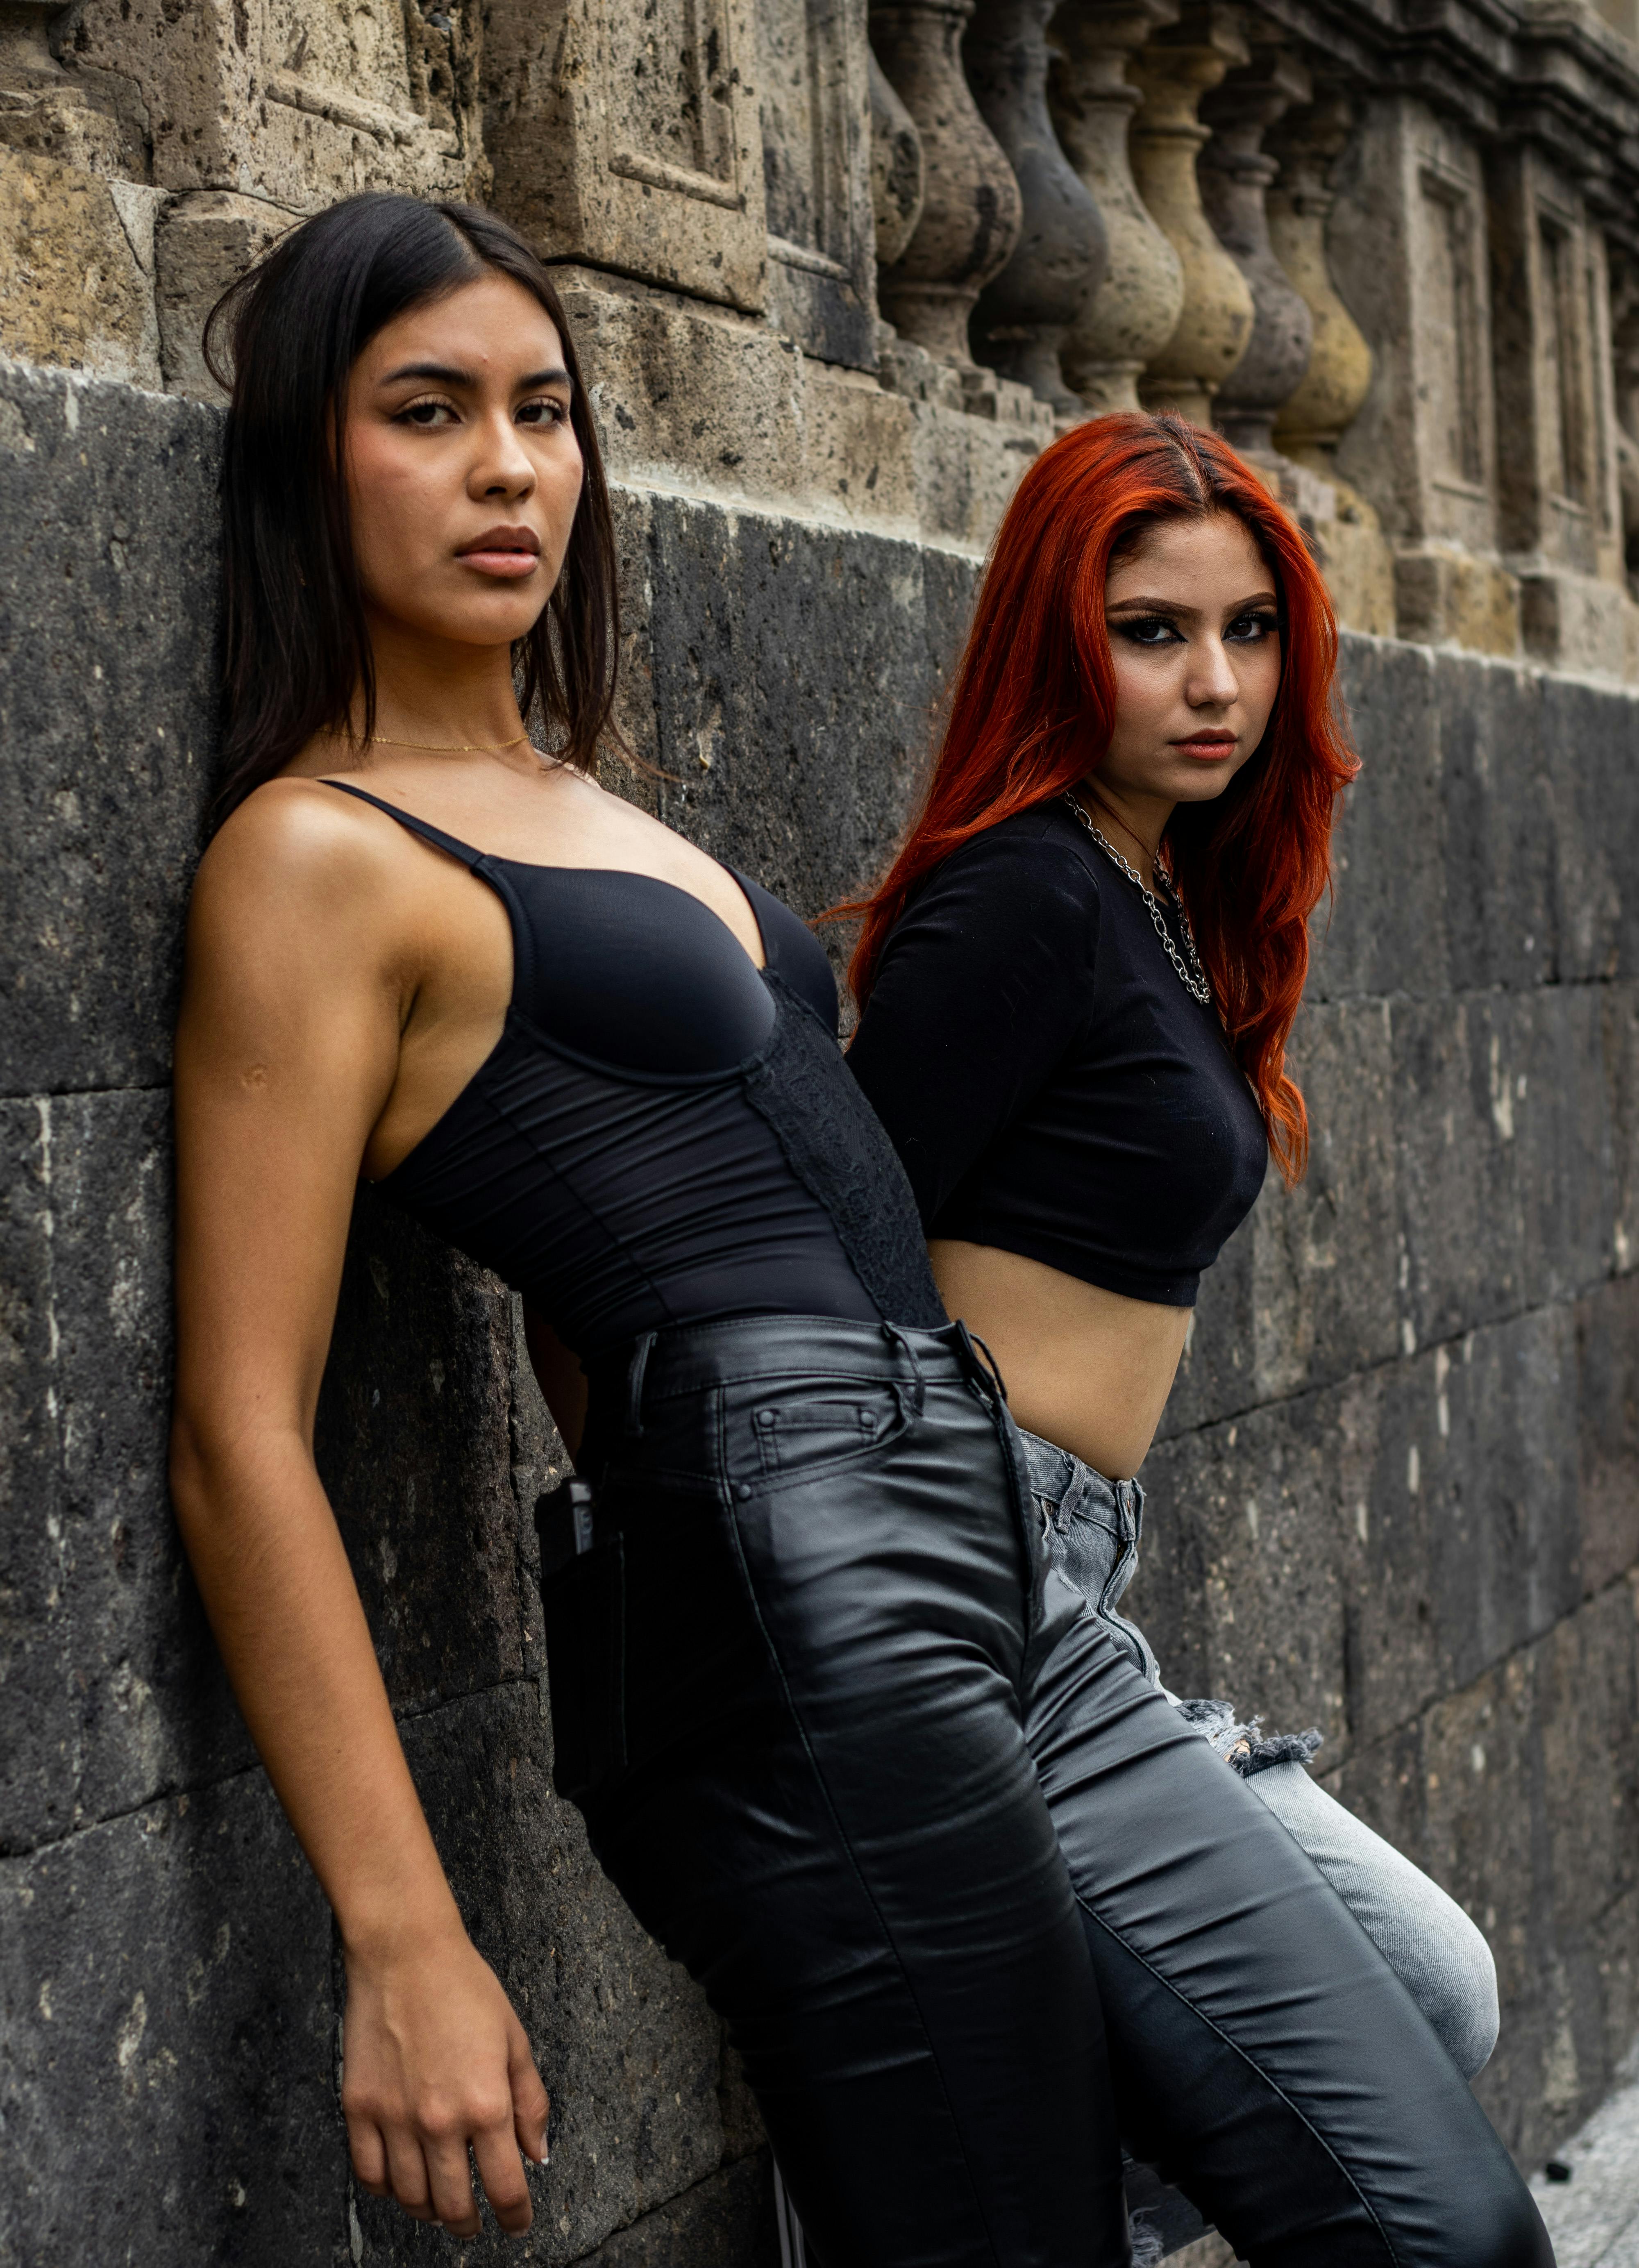 Two women in leather pants and black tops · Free Stock Photo